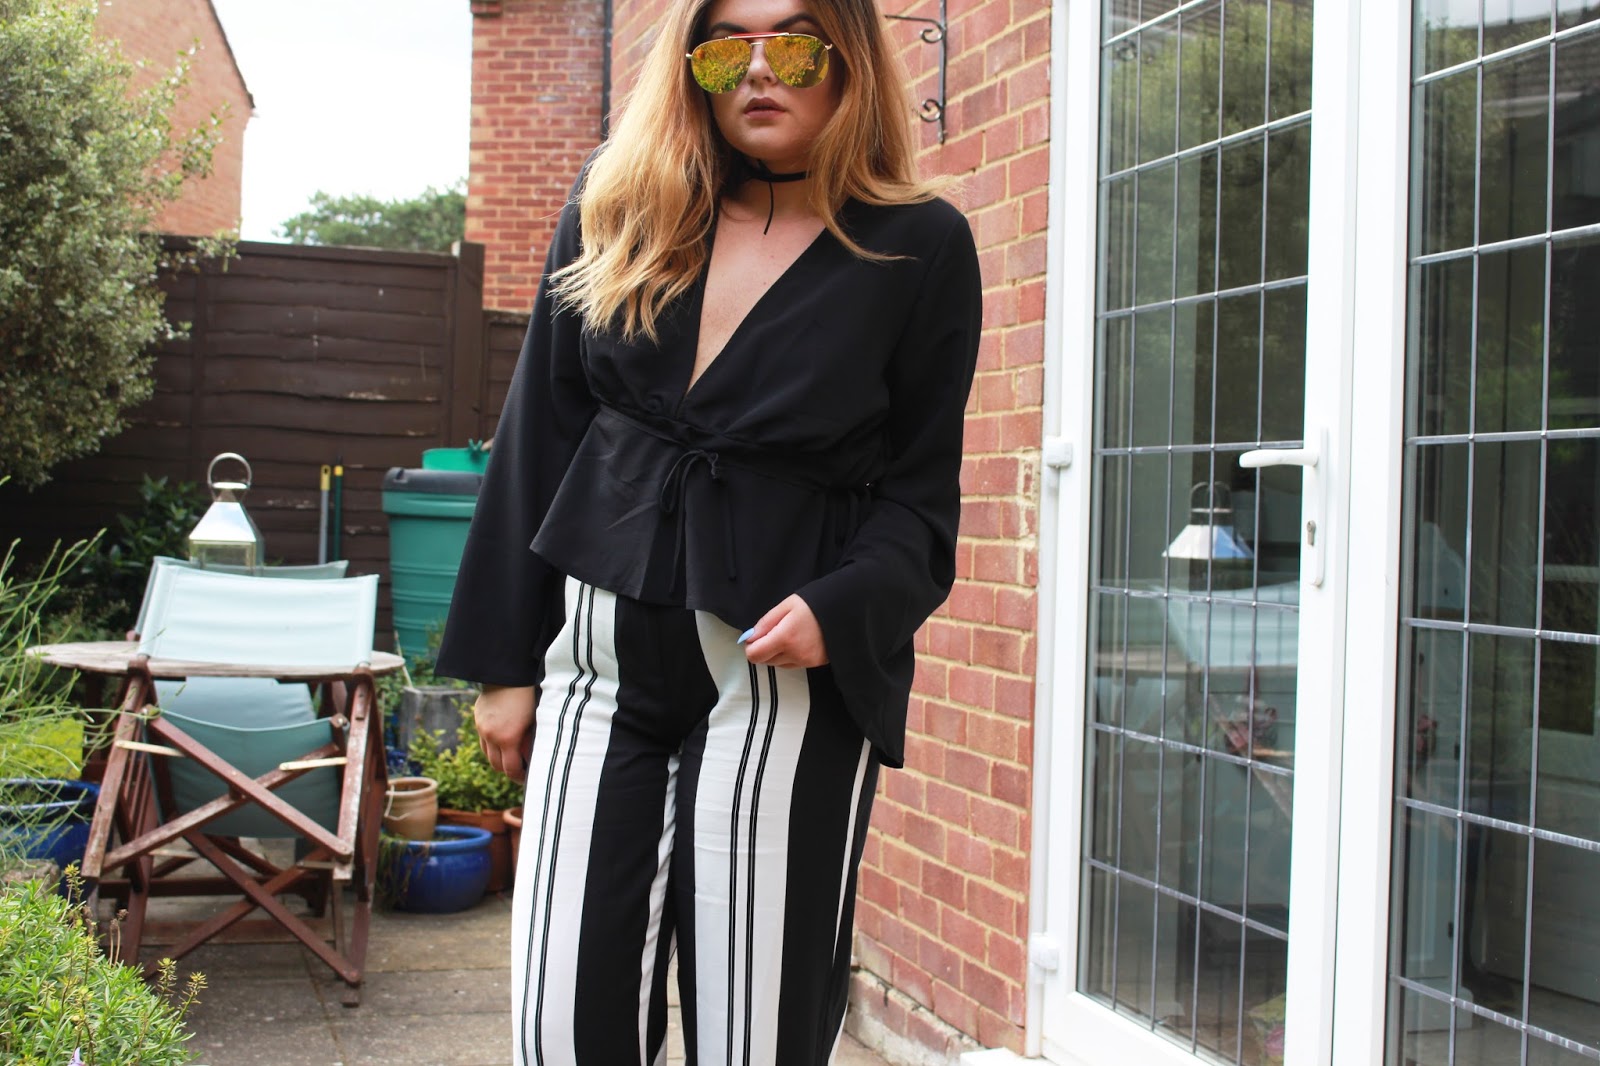 topshop summer 2016, misguided summer, monochrome ootd, fashion blogger uk, outfit inspiration, high street outfit haul 2016